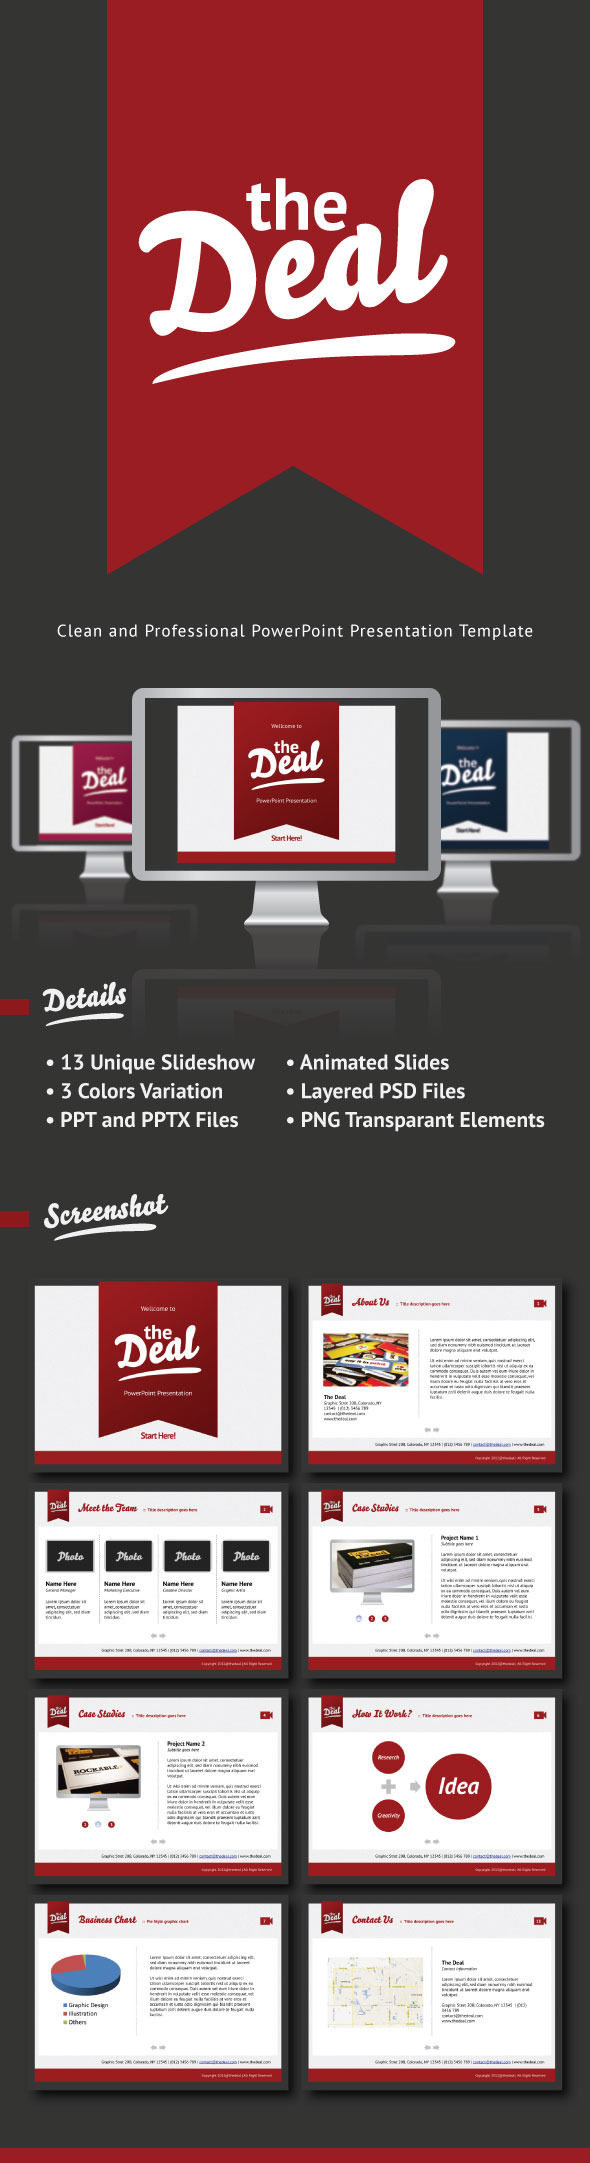 The Deal - Clean and Simple PowerPoint Template